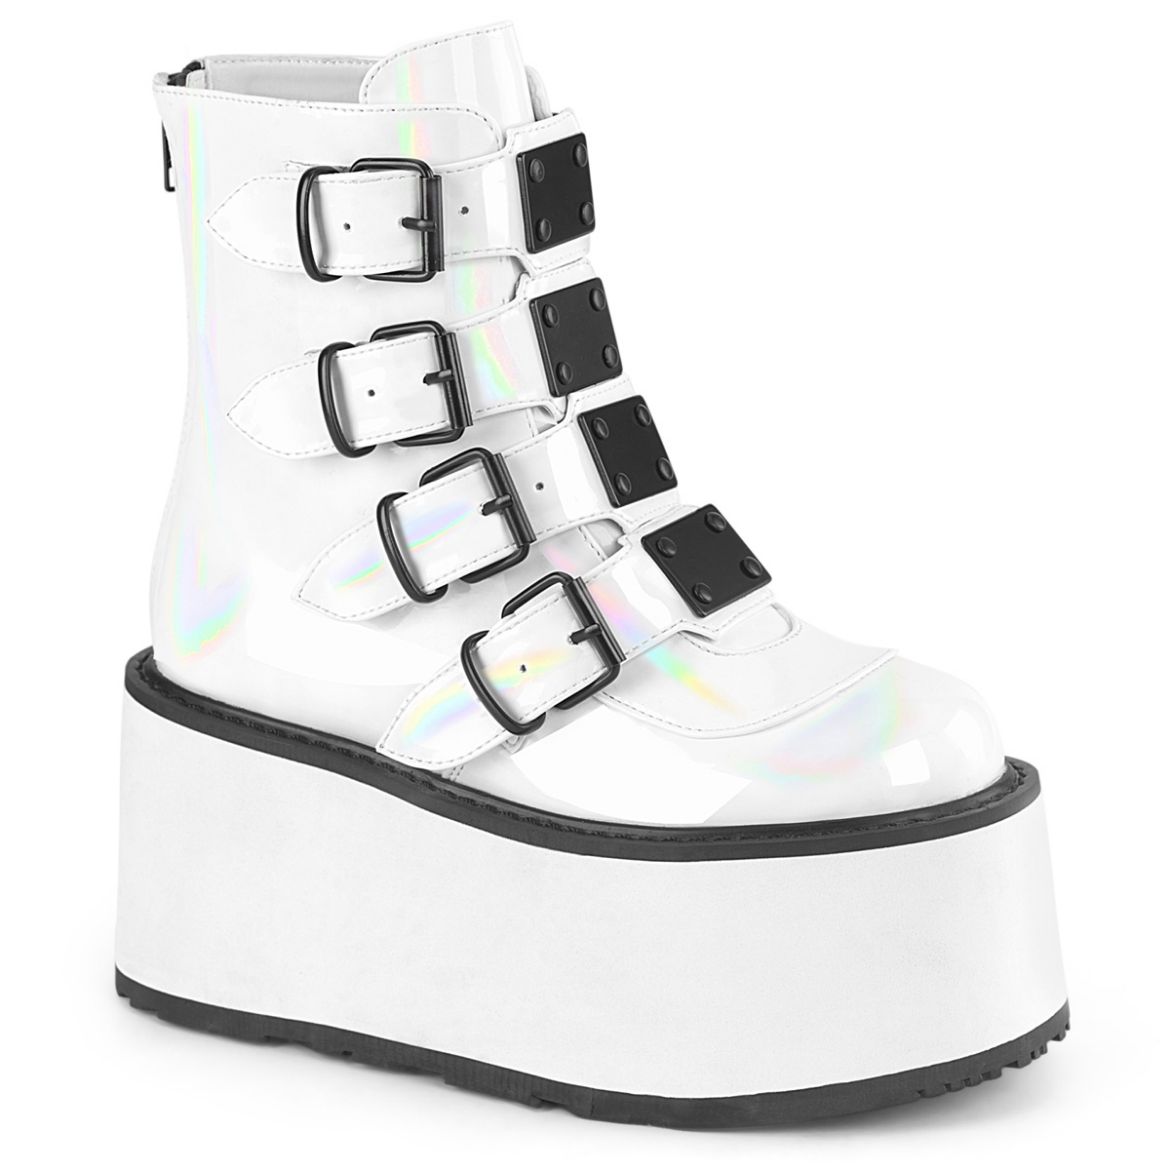 Product image of Demonia DAMNED-105 Wht Holo Pat 3 1/2 Inch PF Ankle Bootw/ 4 Buckle Straps Back MetalZip